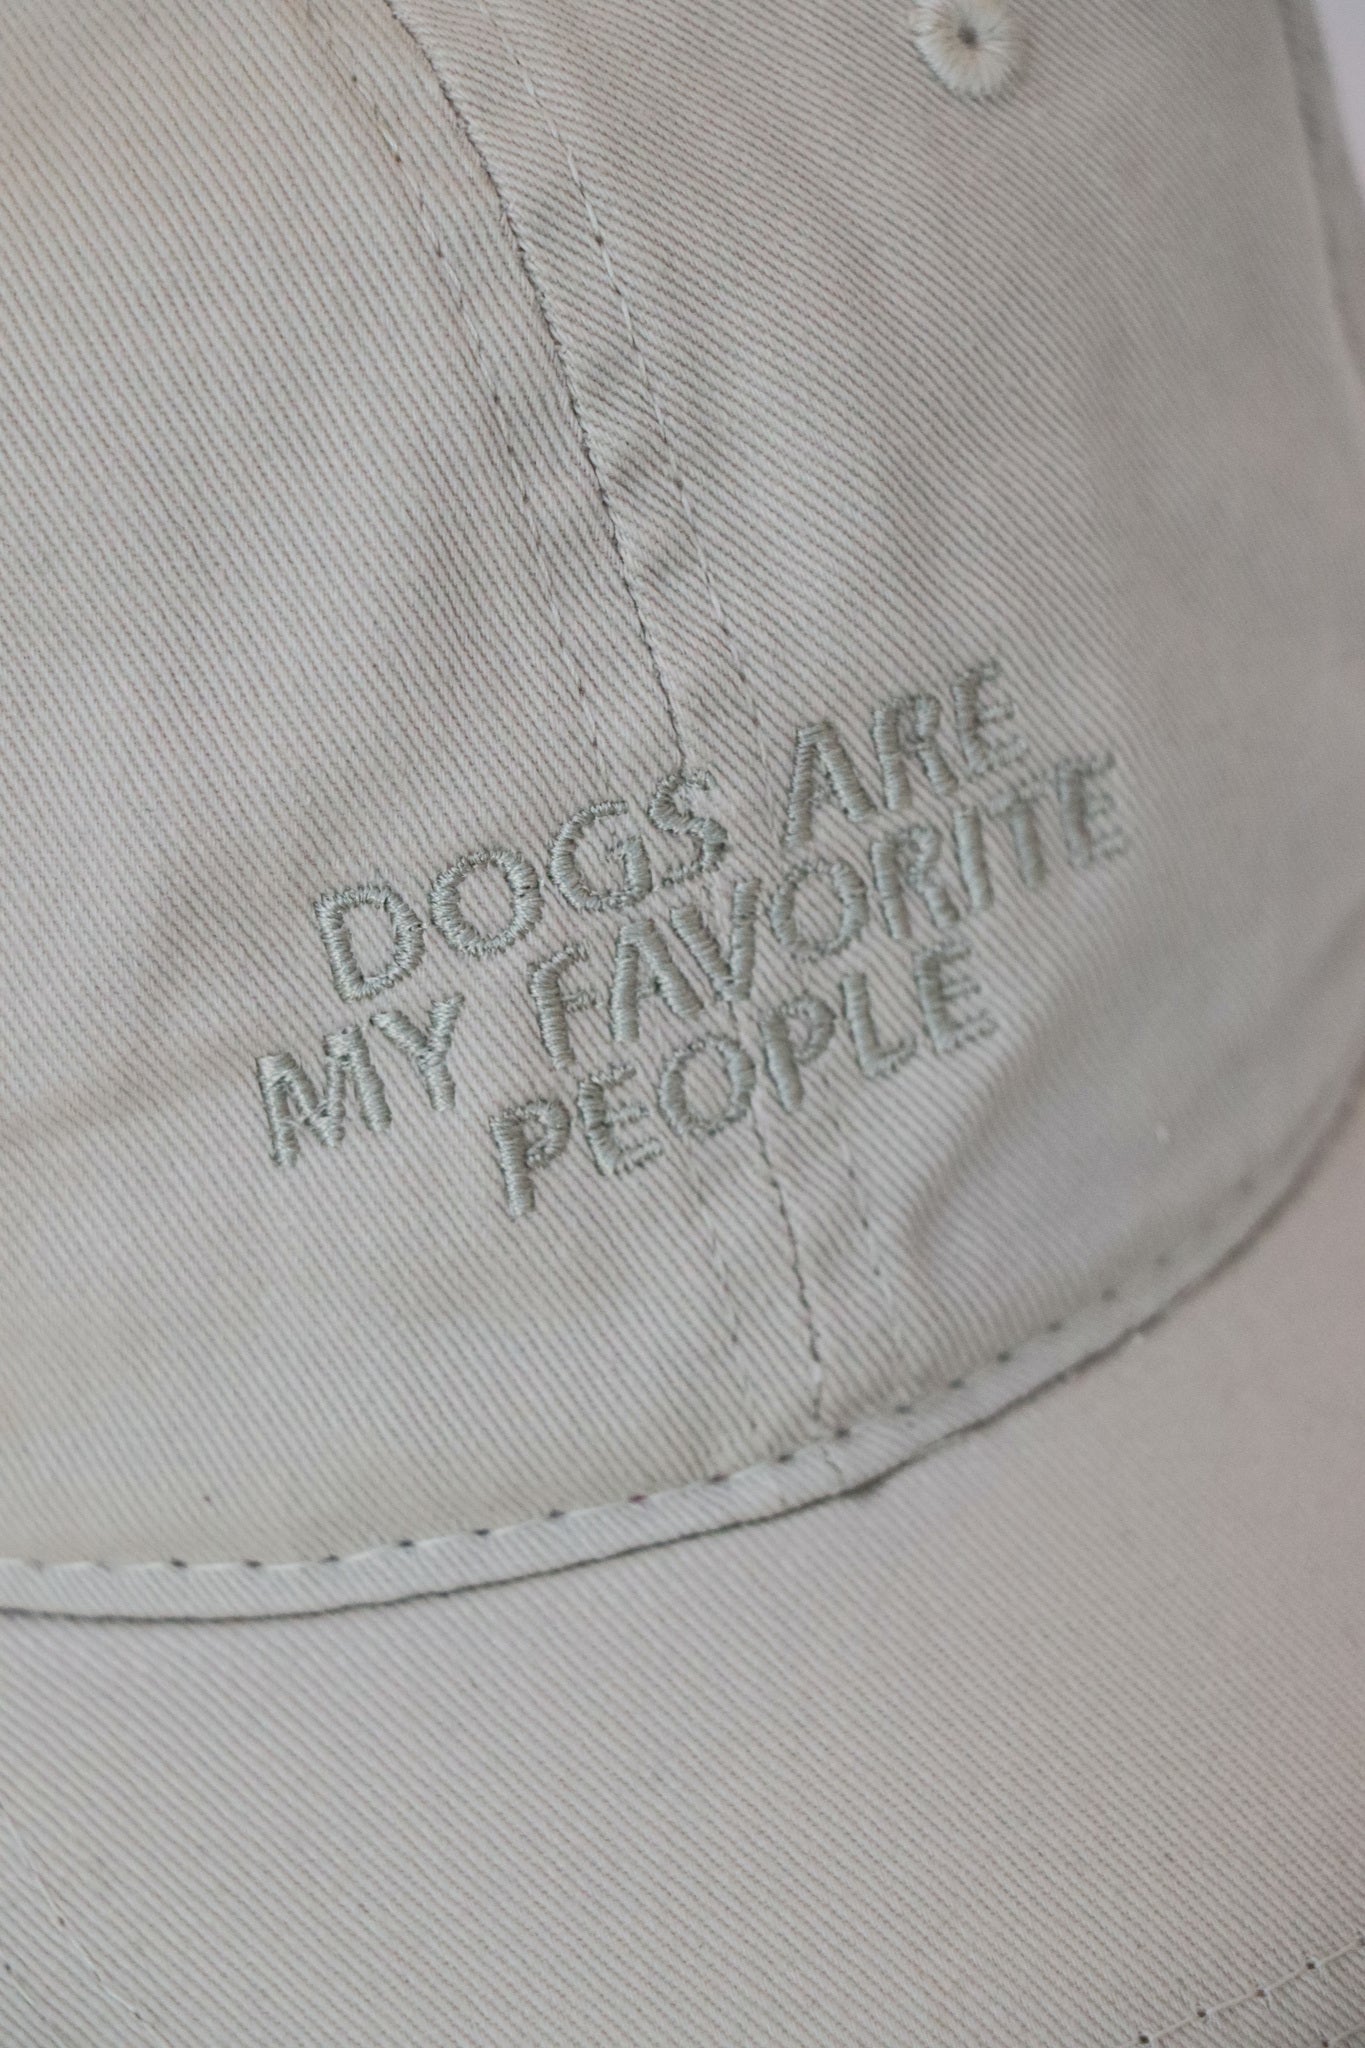 "Dogs Are My Favorite People" Hat